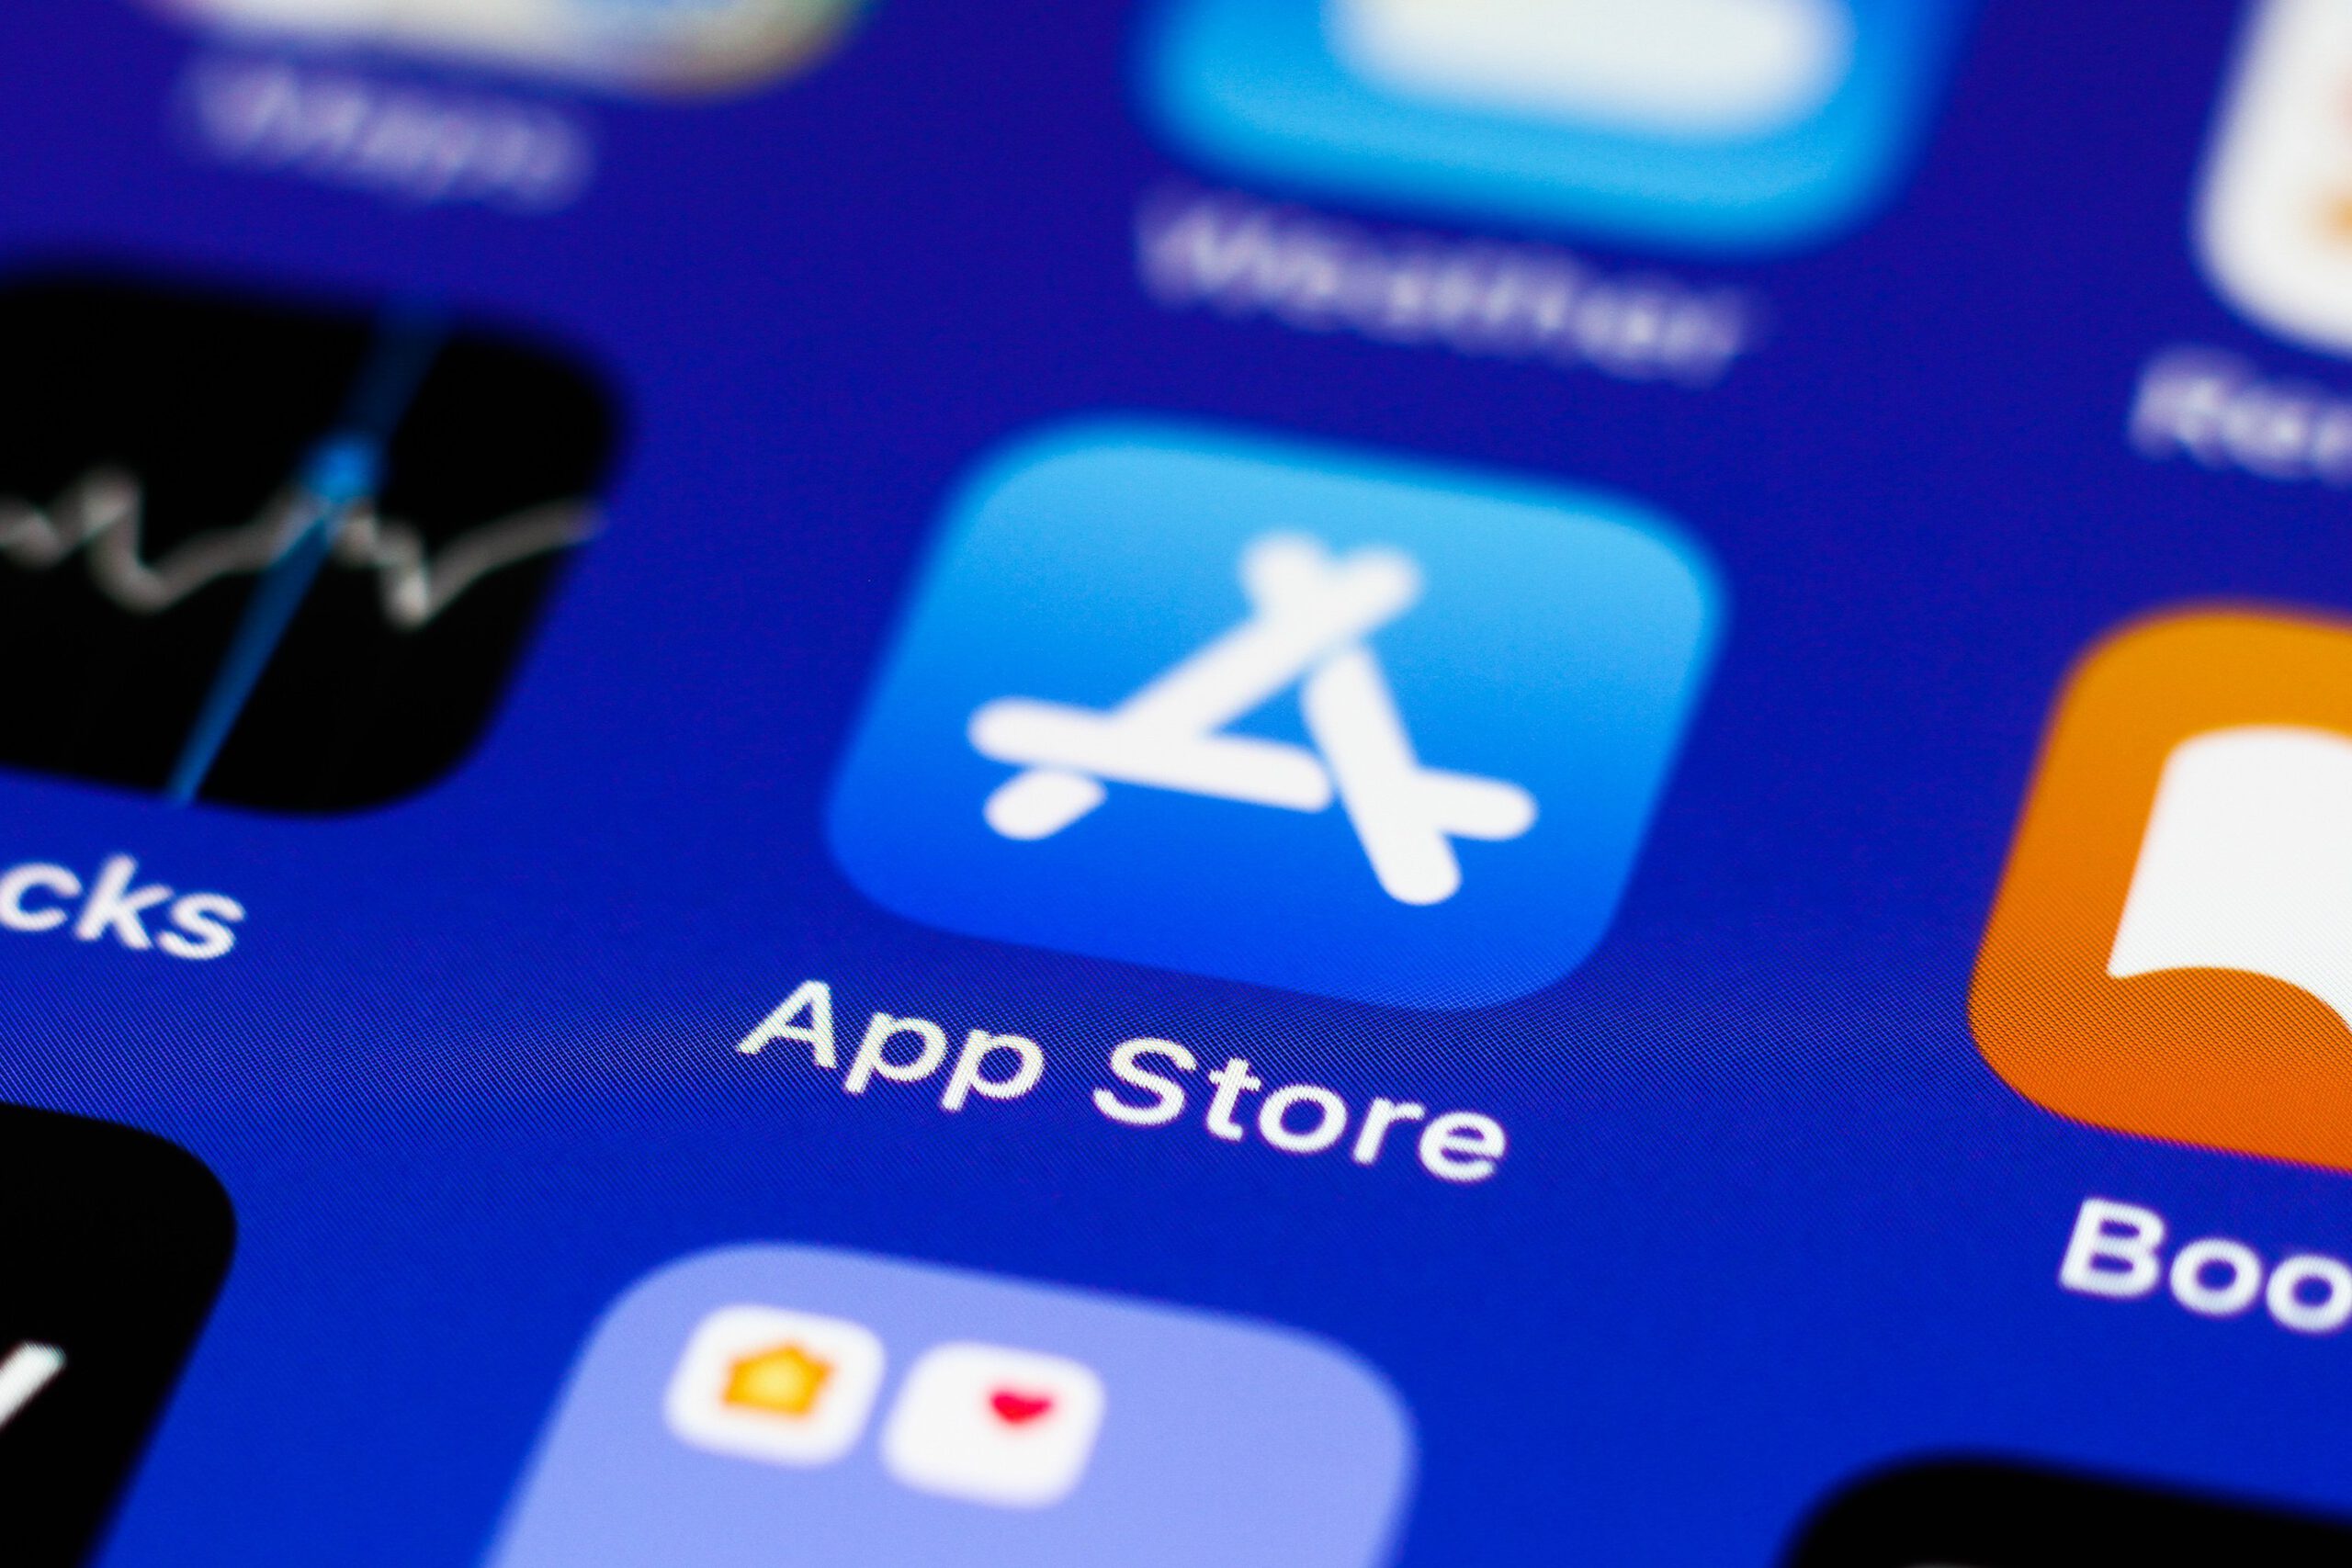 App Store icon displayed on a phone screen is seen in this illustration photo.